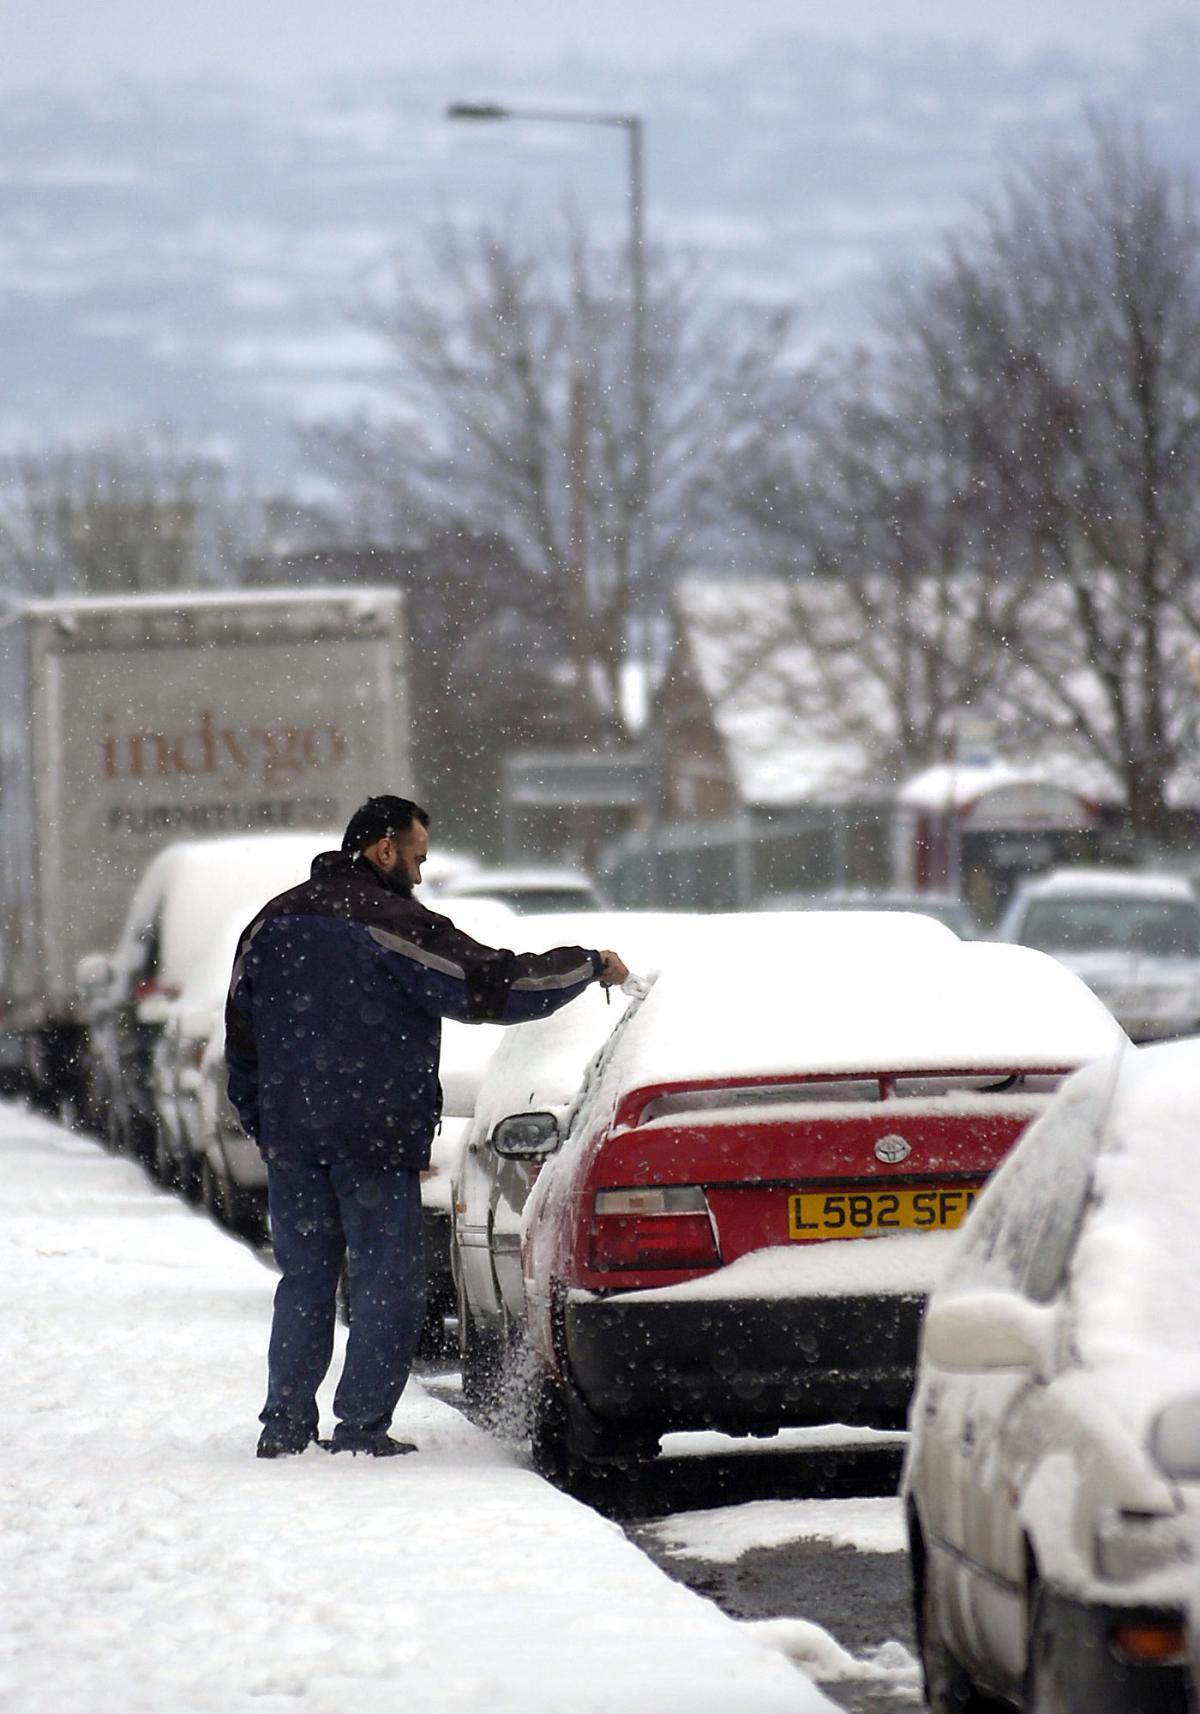 A driver clears snow from his car in Otley Road, Bradford.